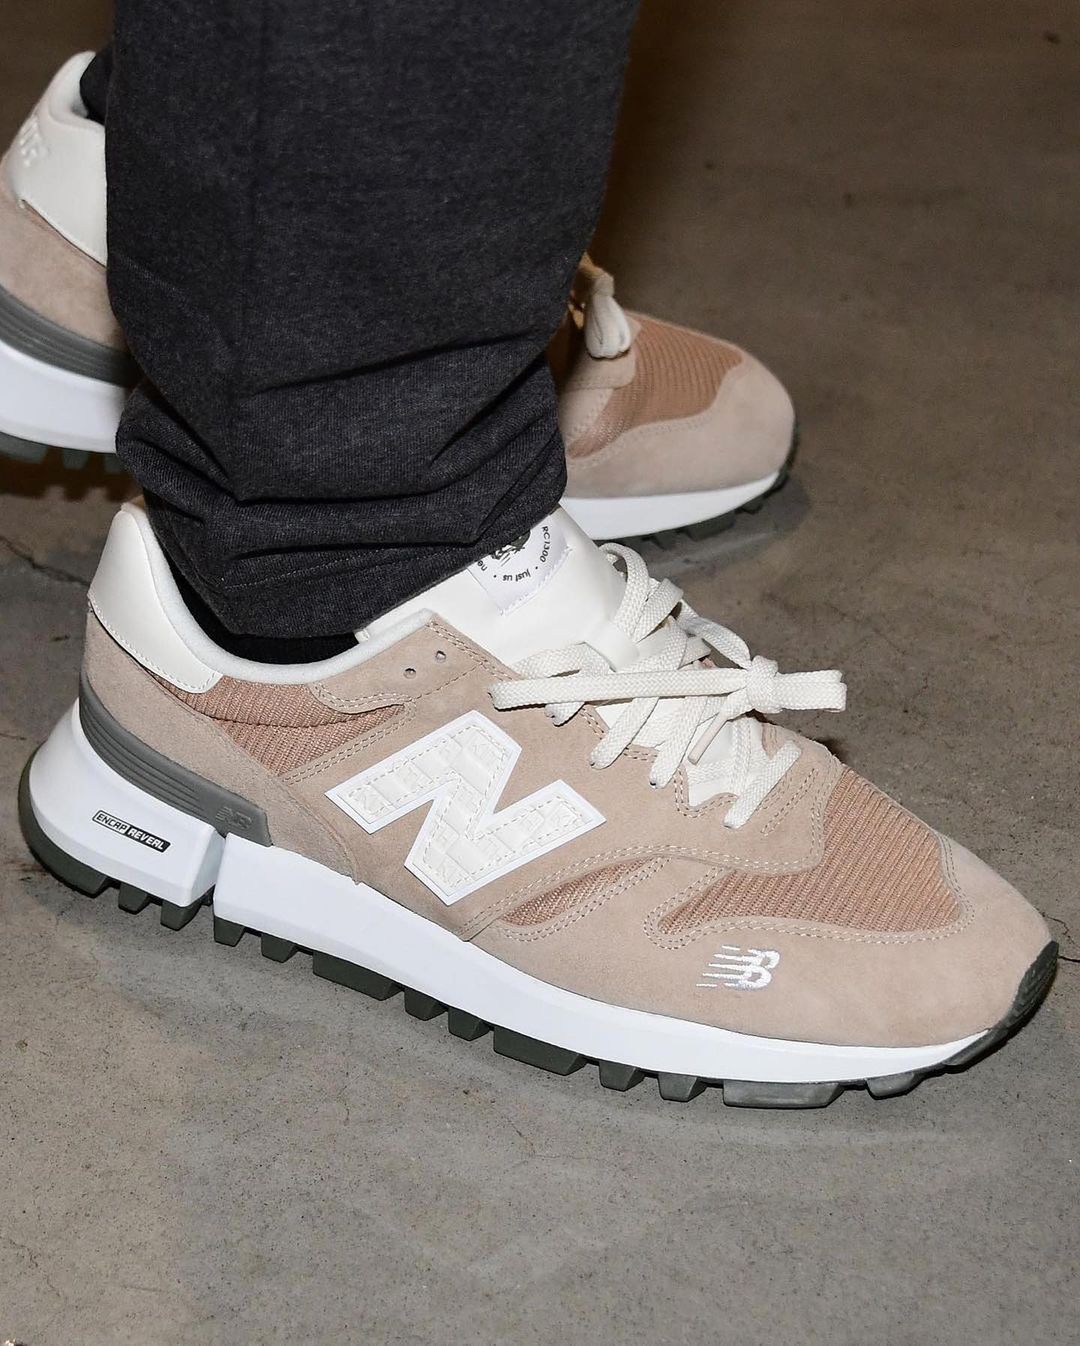 Kith x New Balance RC1300 Revealed in Multiple Colorways